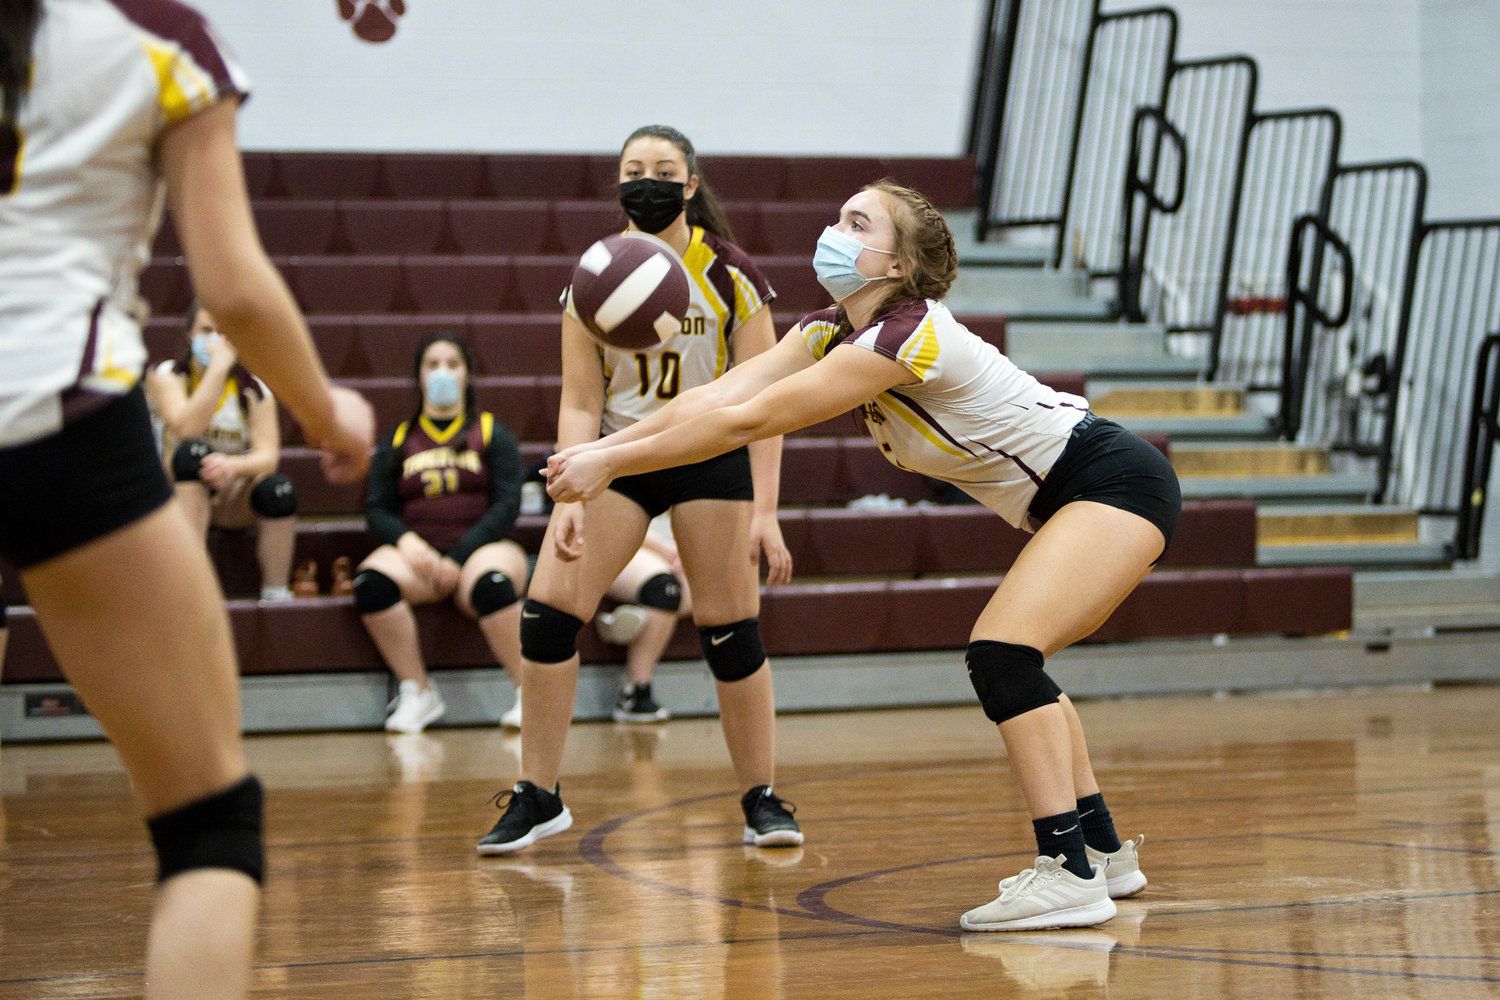 Tiverton's Emily digs out a serve during Tuesday night's home match against Paul Cuffee School.